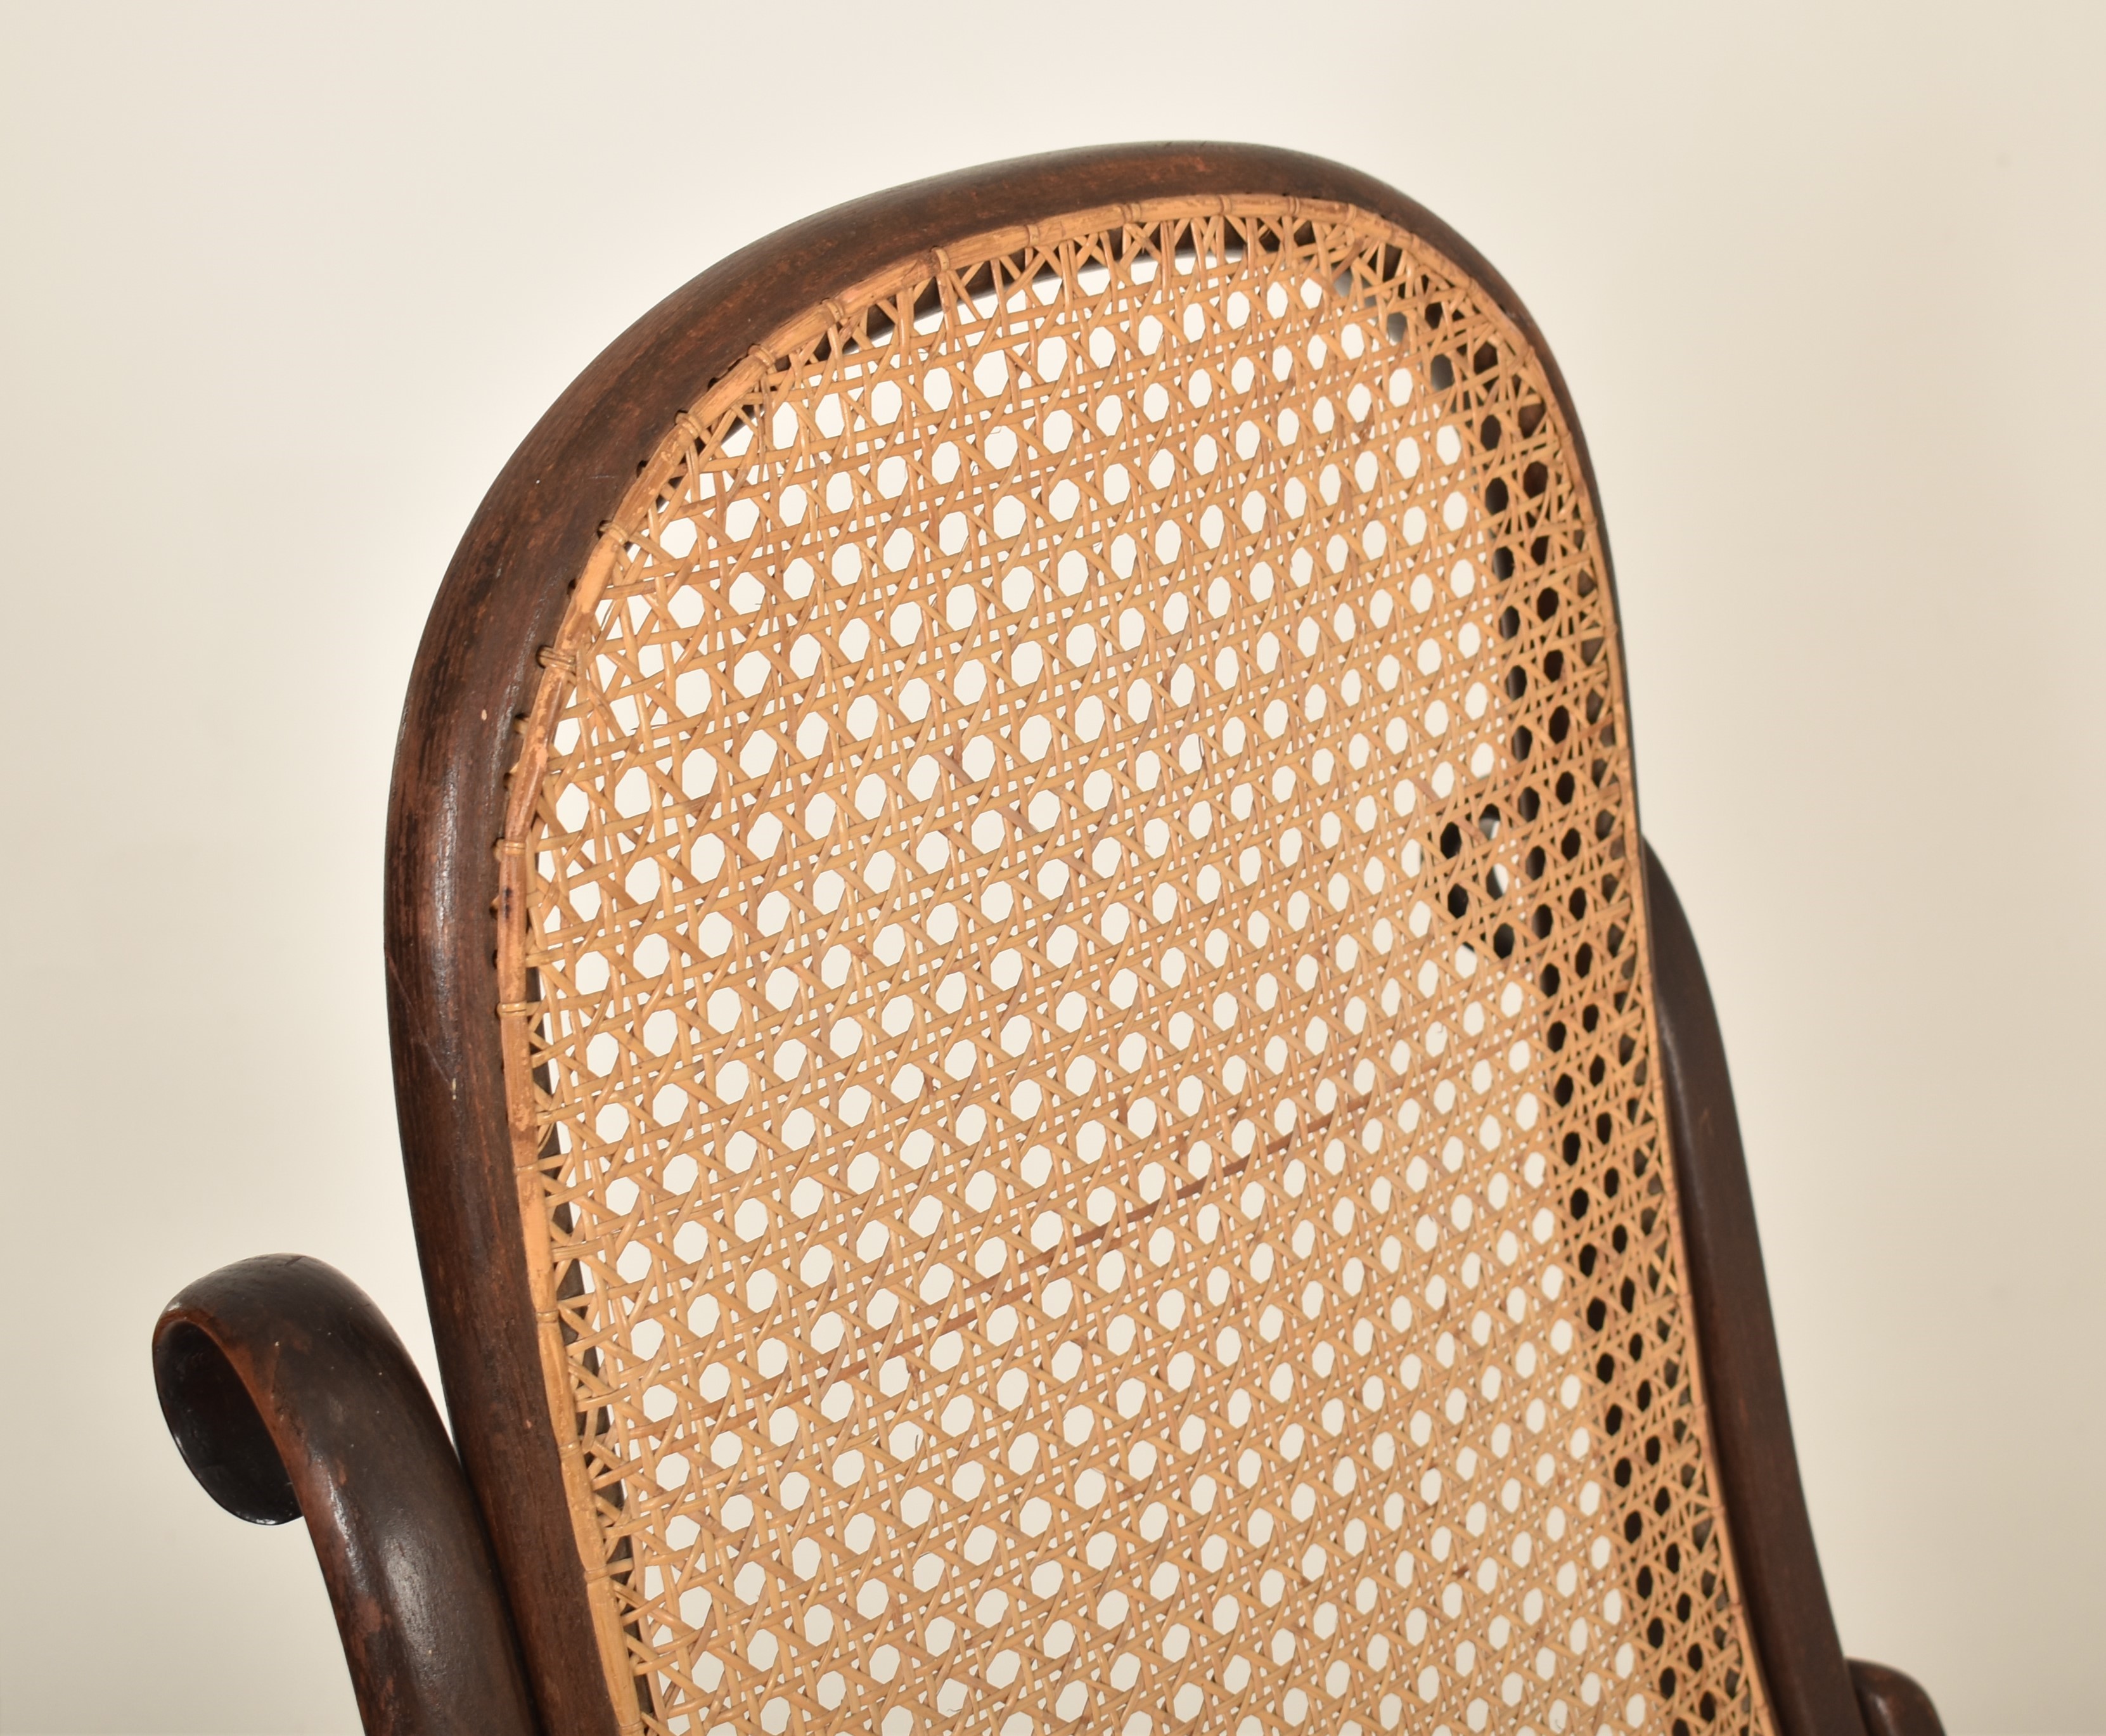 THONET - EARLY 20TH CENTURY BENTWOOD & CANE FIRESIDE ARMCHAIR - Image 2 of 7